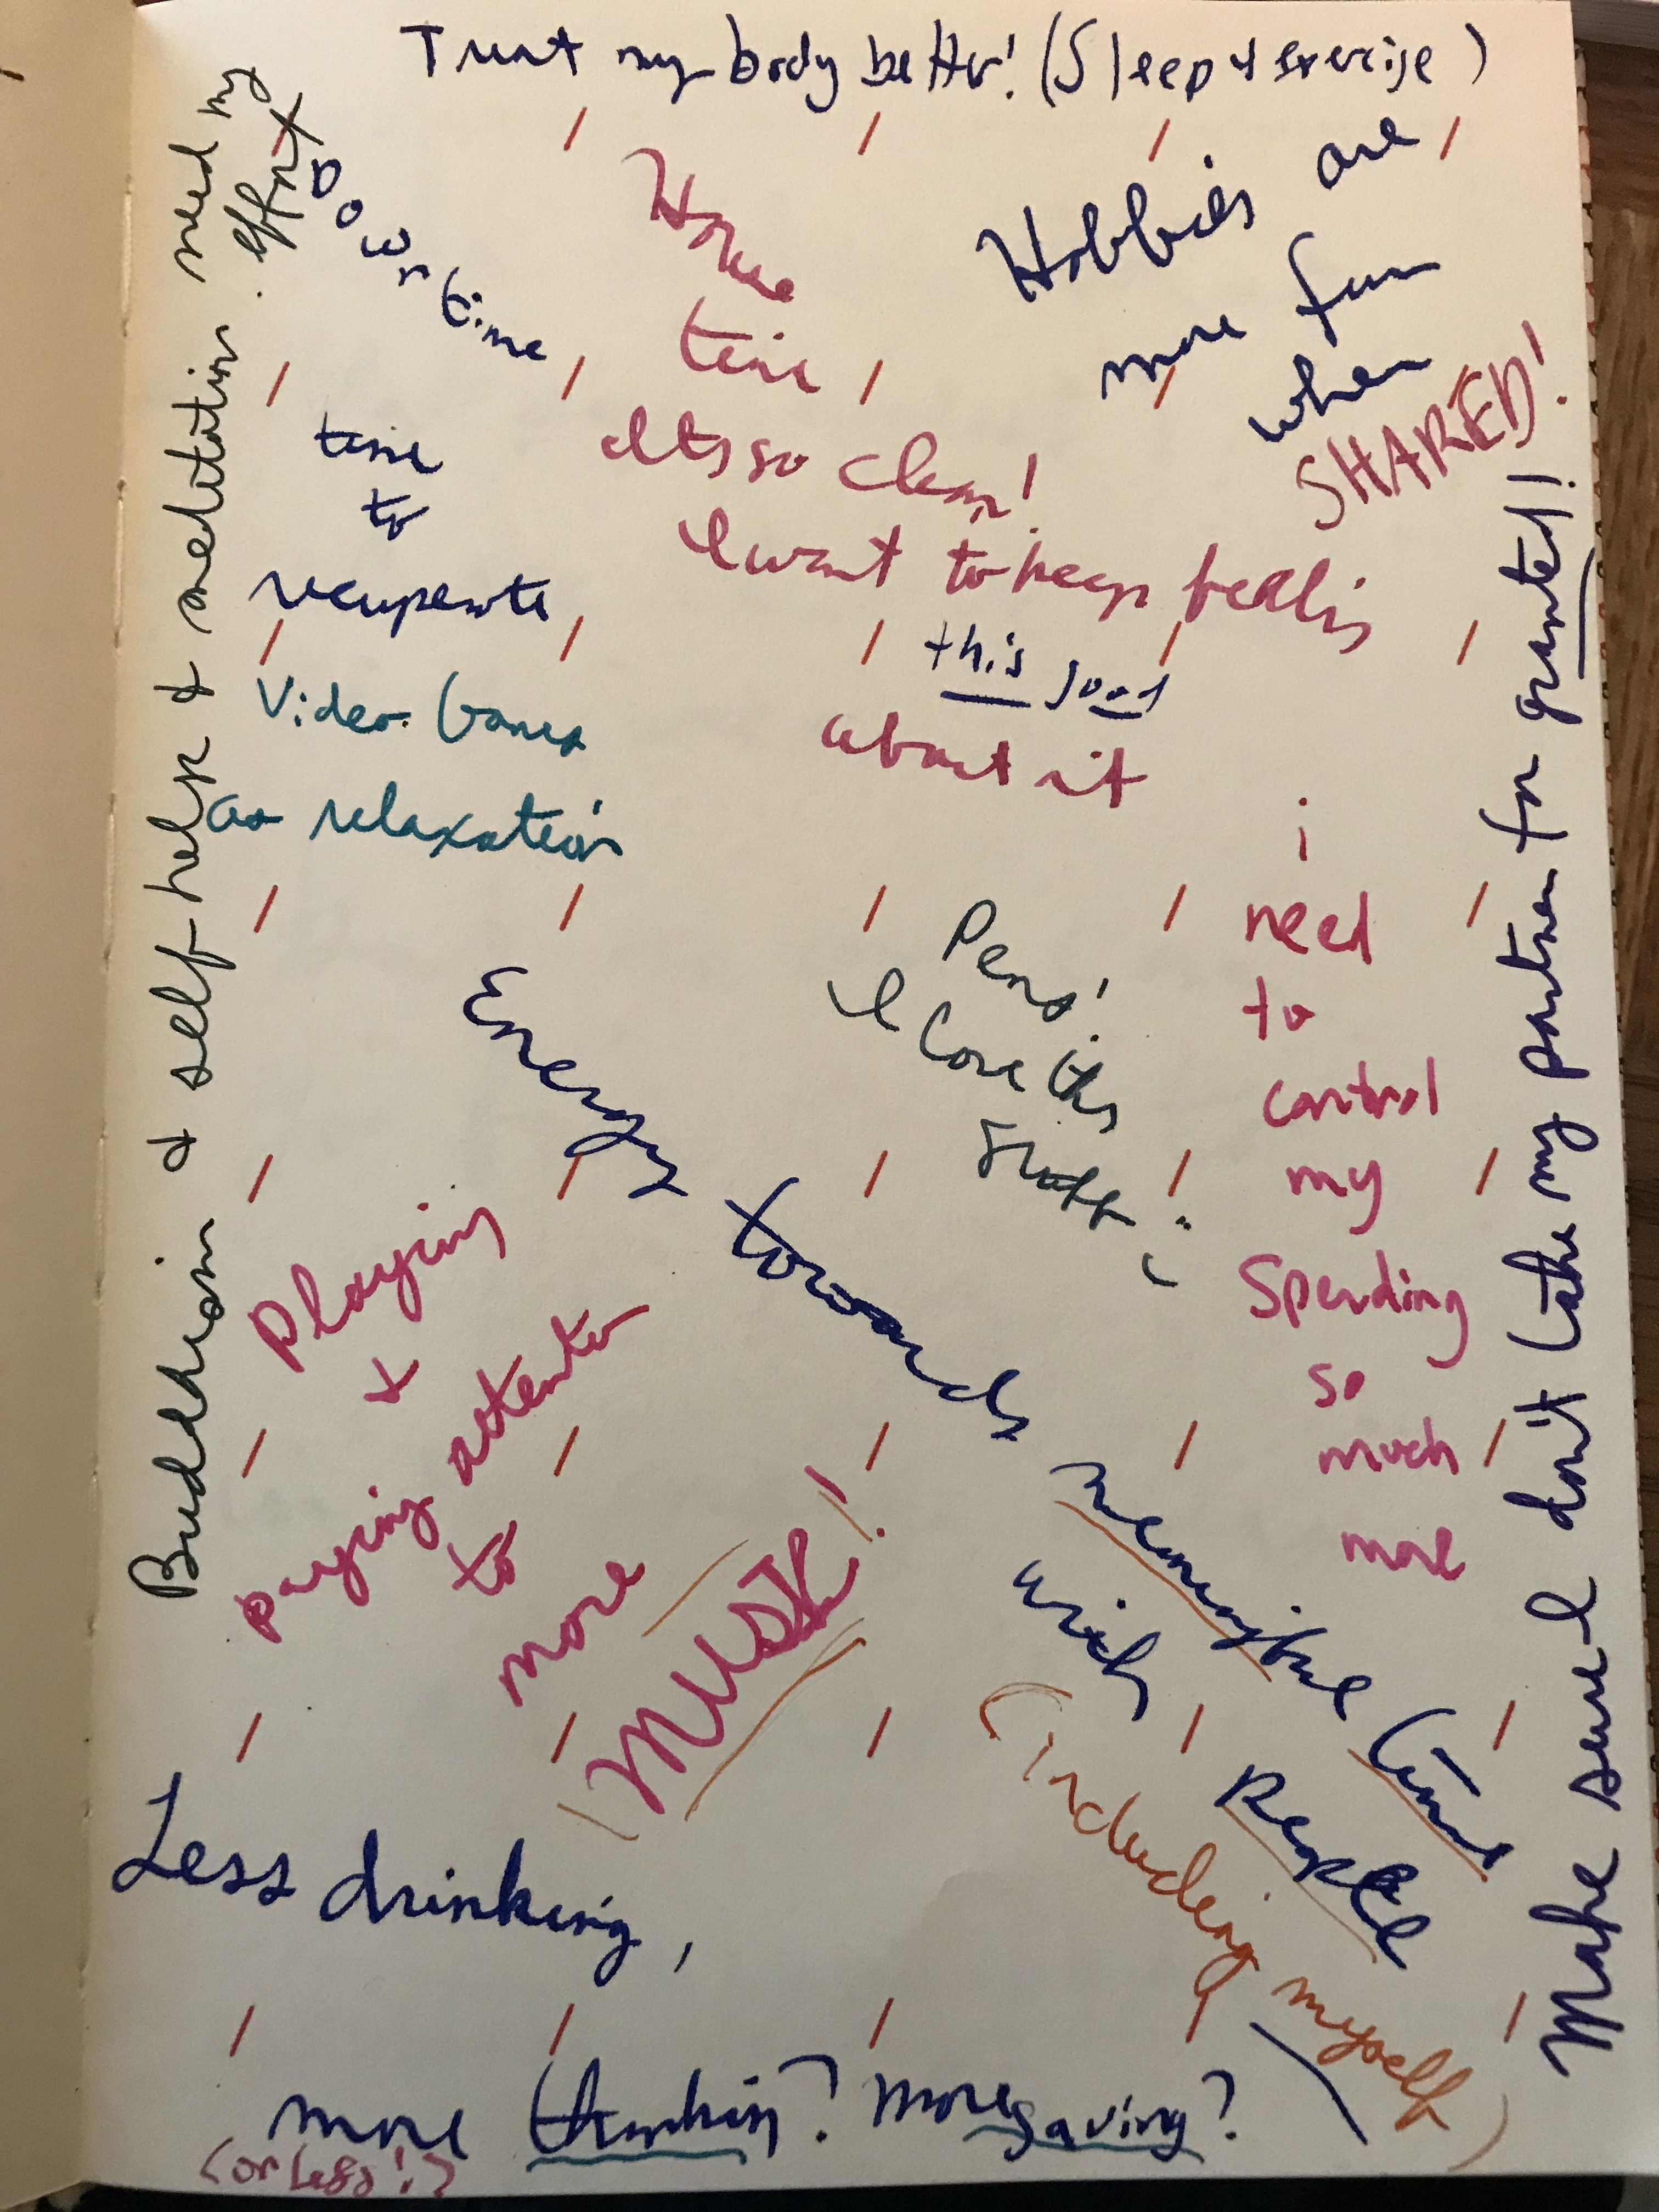 journal page with many phrases written on it, such as i need to control my spending so much more, energy towards meaningful time with people, hobbies are more fun when SHARED, and the like